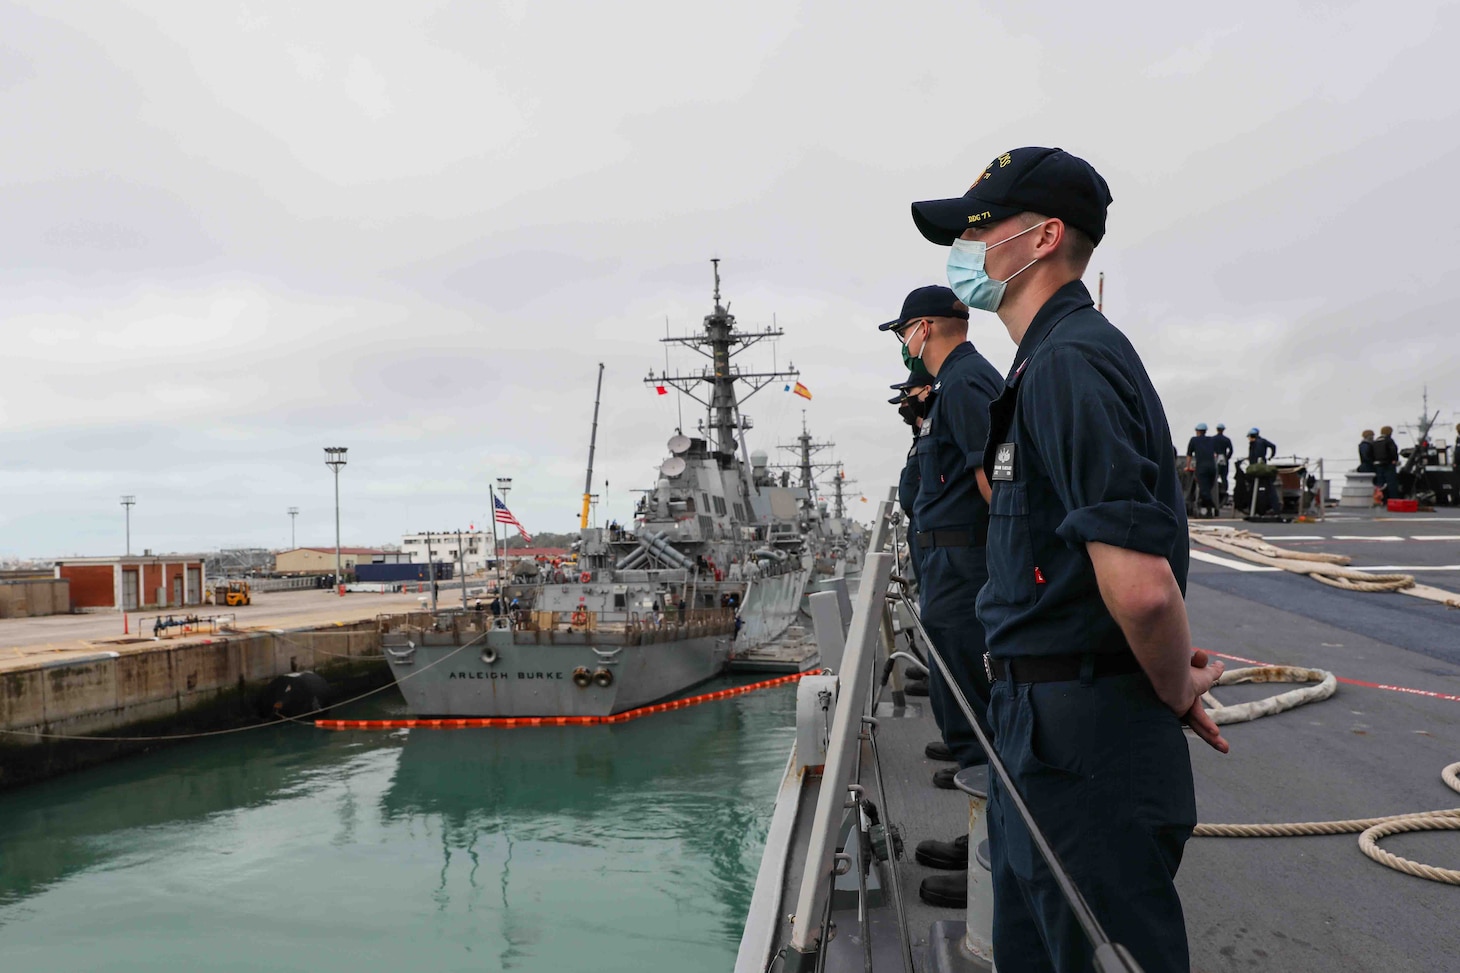 Cryptologic Technician (Collection) 2nd Class Benjamin Blanchard, right, assigned to the Arleigh Burke-class guided-missile destroyer USS Ross (DDG 71), mans the ship's rail as Ross gets underway from Naval Station Rota, Spain, Dec. 27, 2021. Ross, forward-deployed to Rota, Spain, is on its 12th patrol in the U.S. Sixth Fleet area of operations in support of regional allies and partners and U.S. national security interests in Europe and Africa. (U.S. Navy photo by Mass Communication Specialist 2nd Class Claire DuBois/Released)